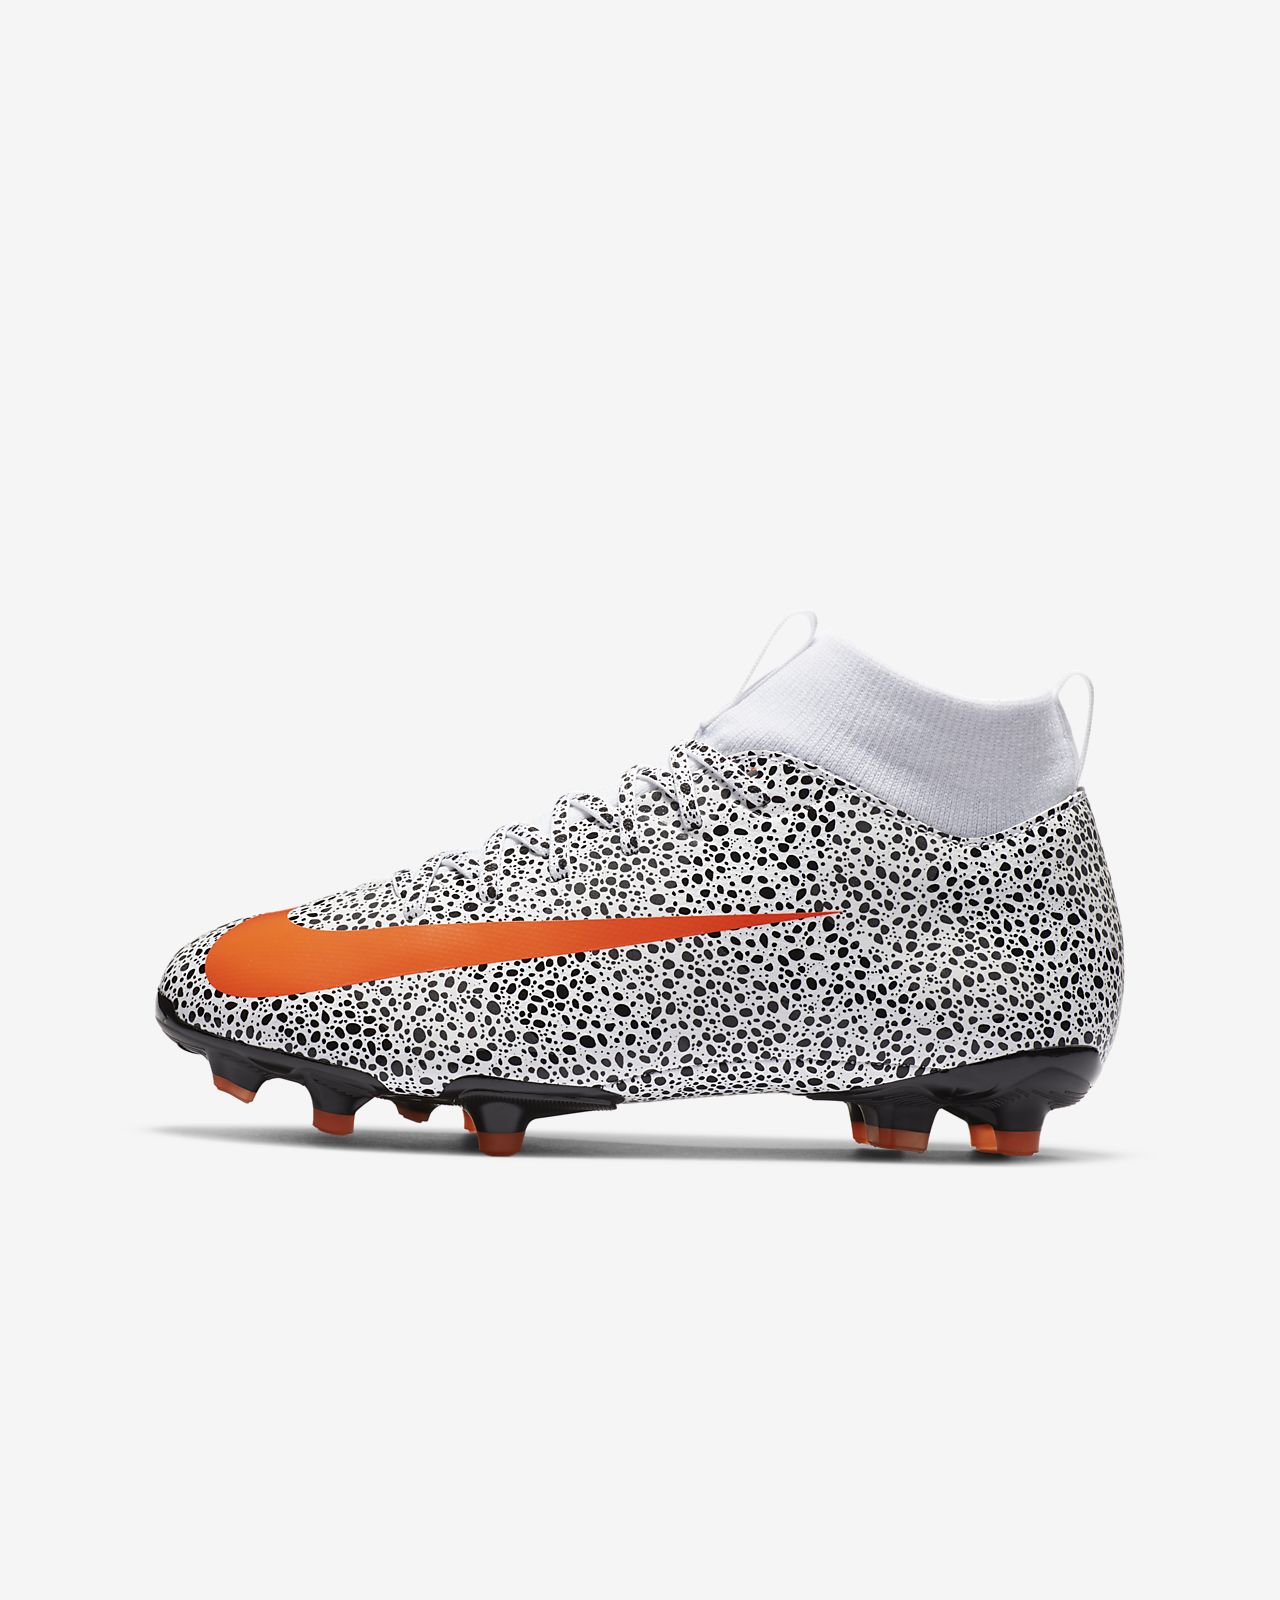 White Cr7 Football Boots Online DHgate.com